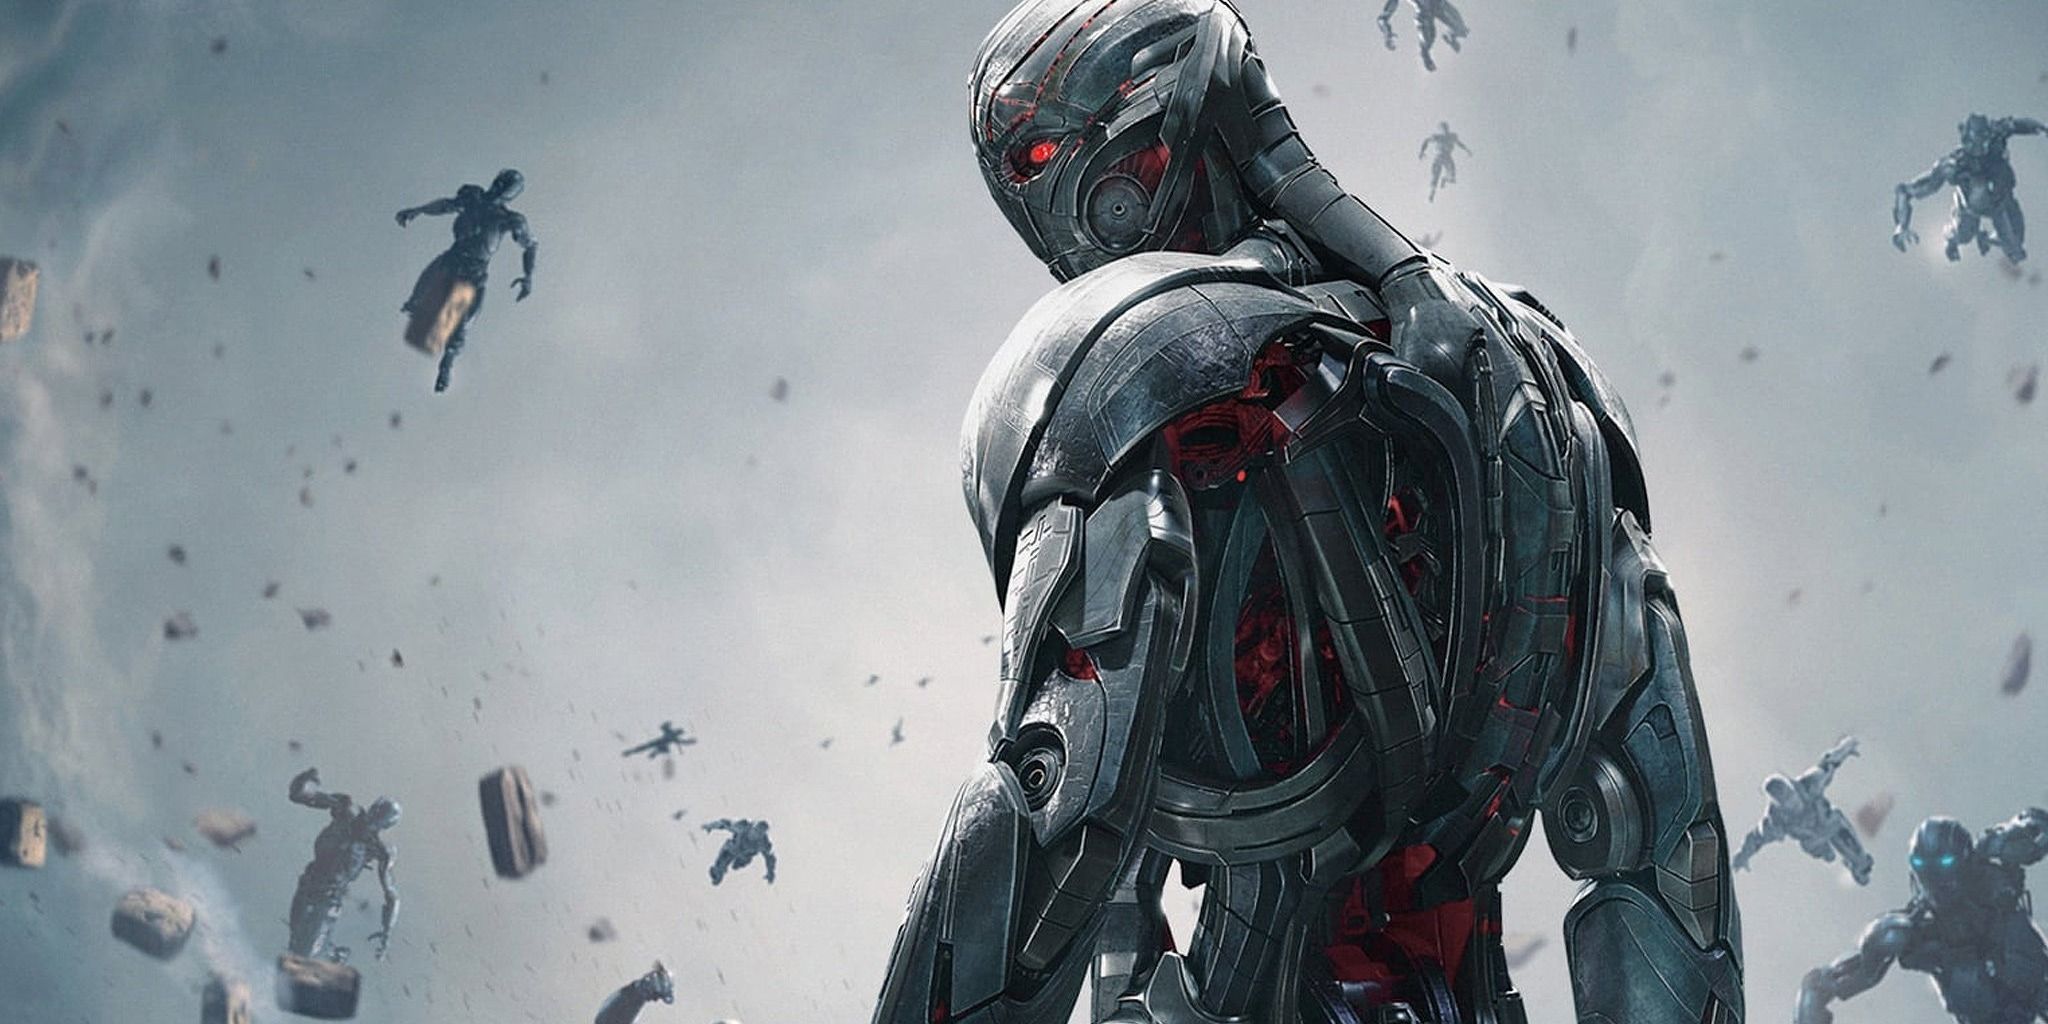 Ultron in the MCU looking over his shoulder with flying characters in the background